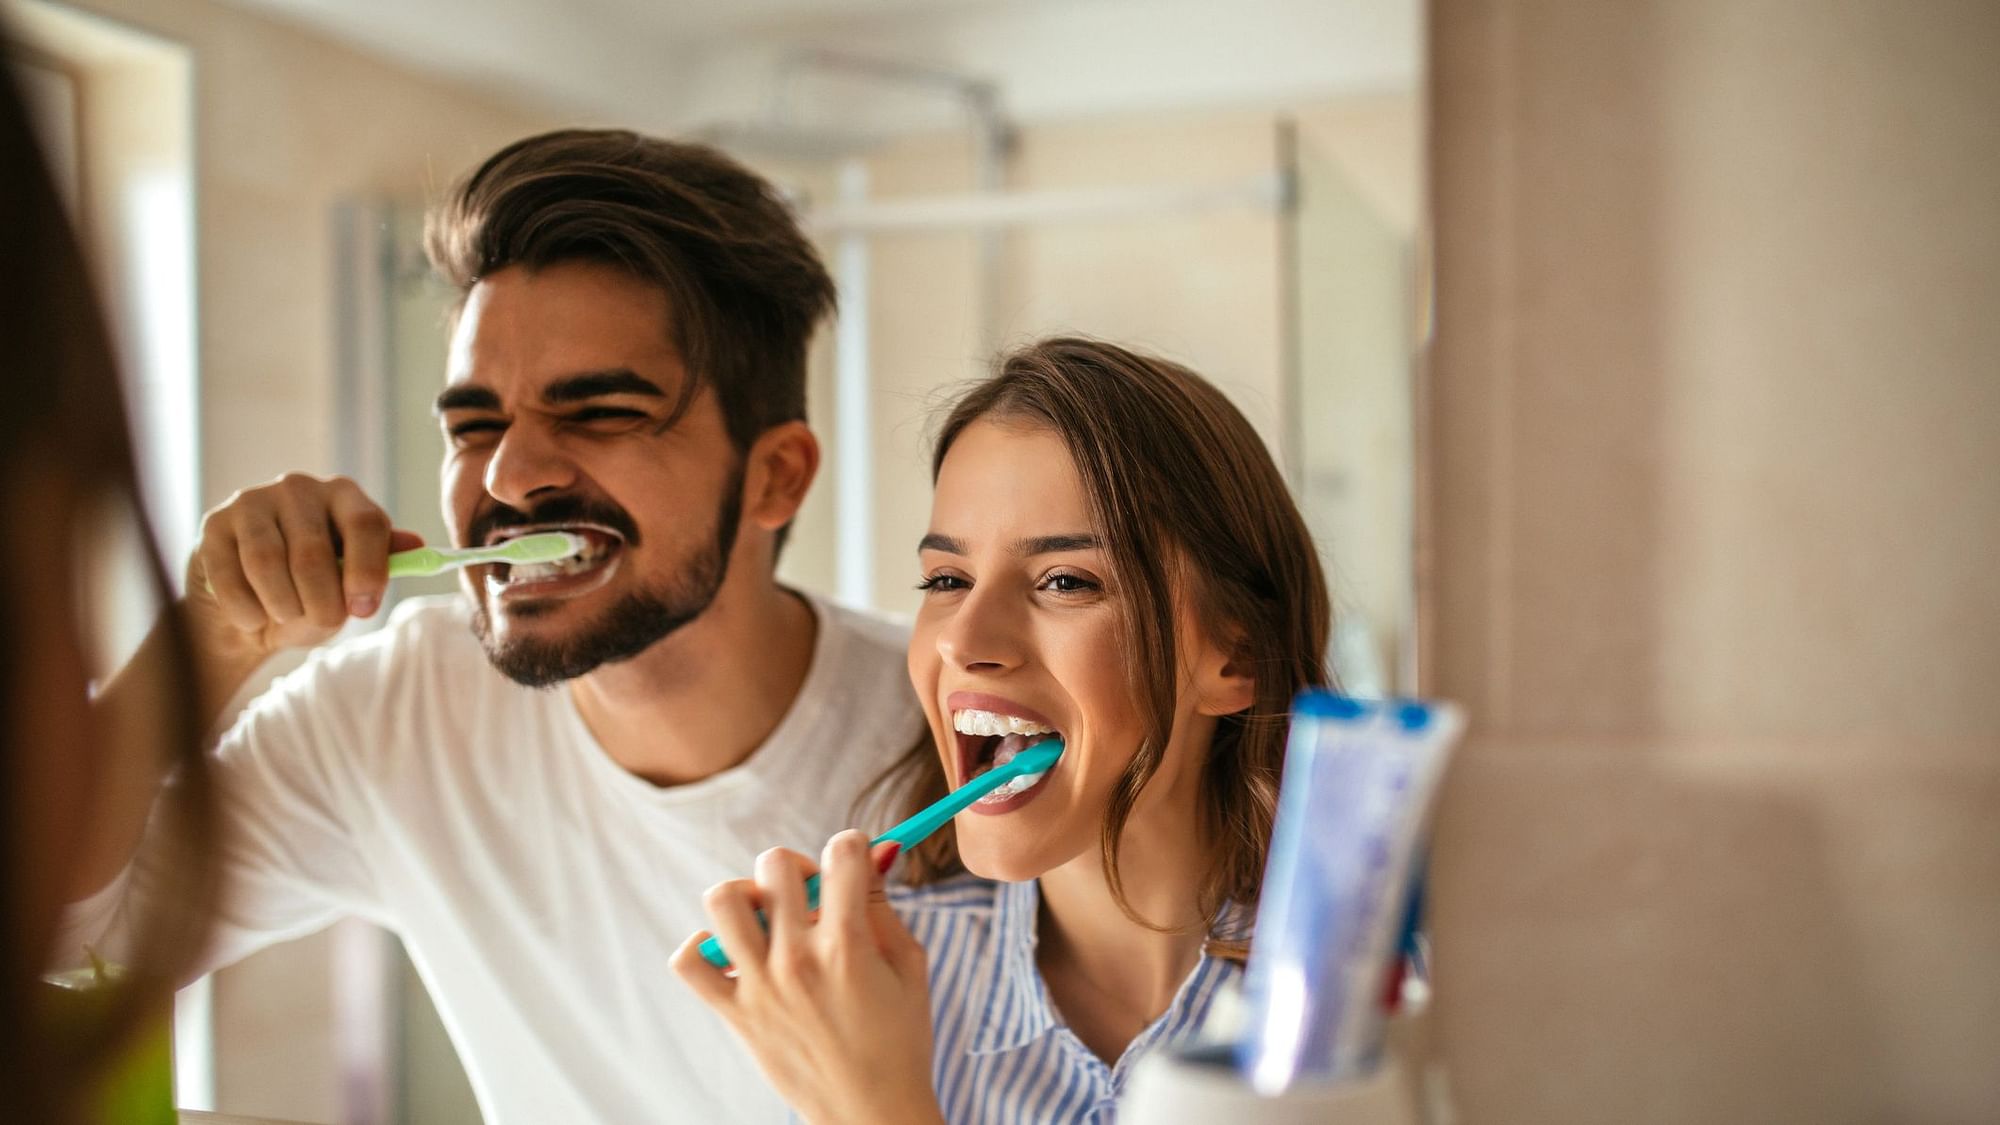 Brushing teeth frequently linked to reduced heart failure risk: Study